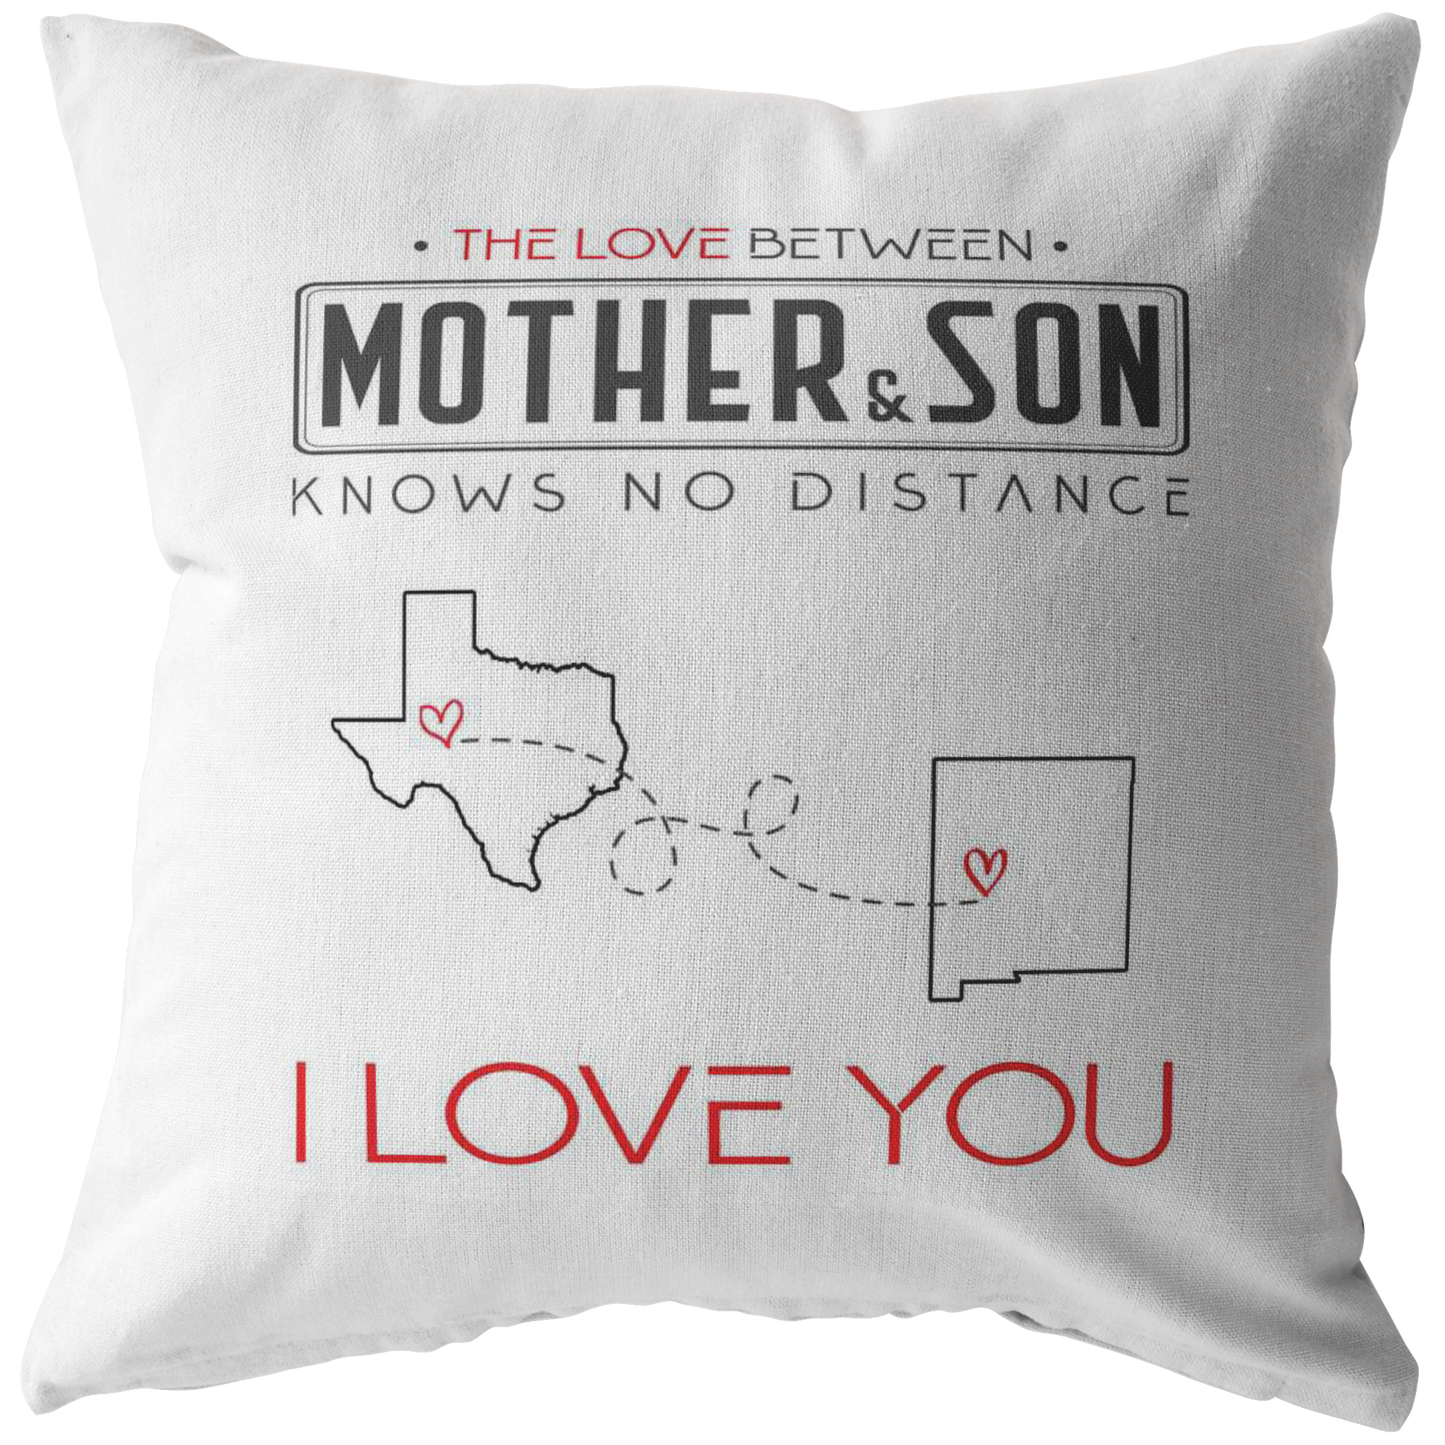 ND-pl20419524-sp-23497 - Long Distance Mom - The Love Between Mother  Son Knows No D